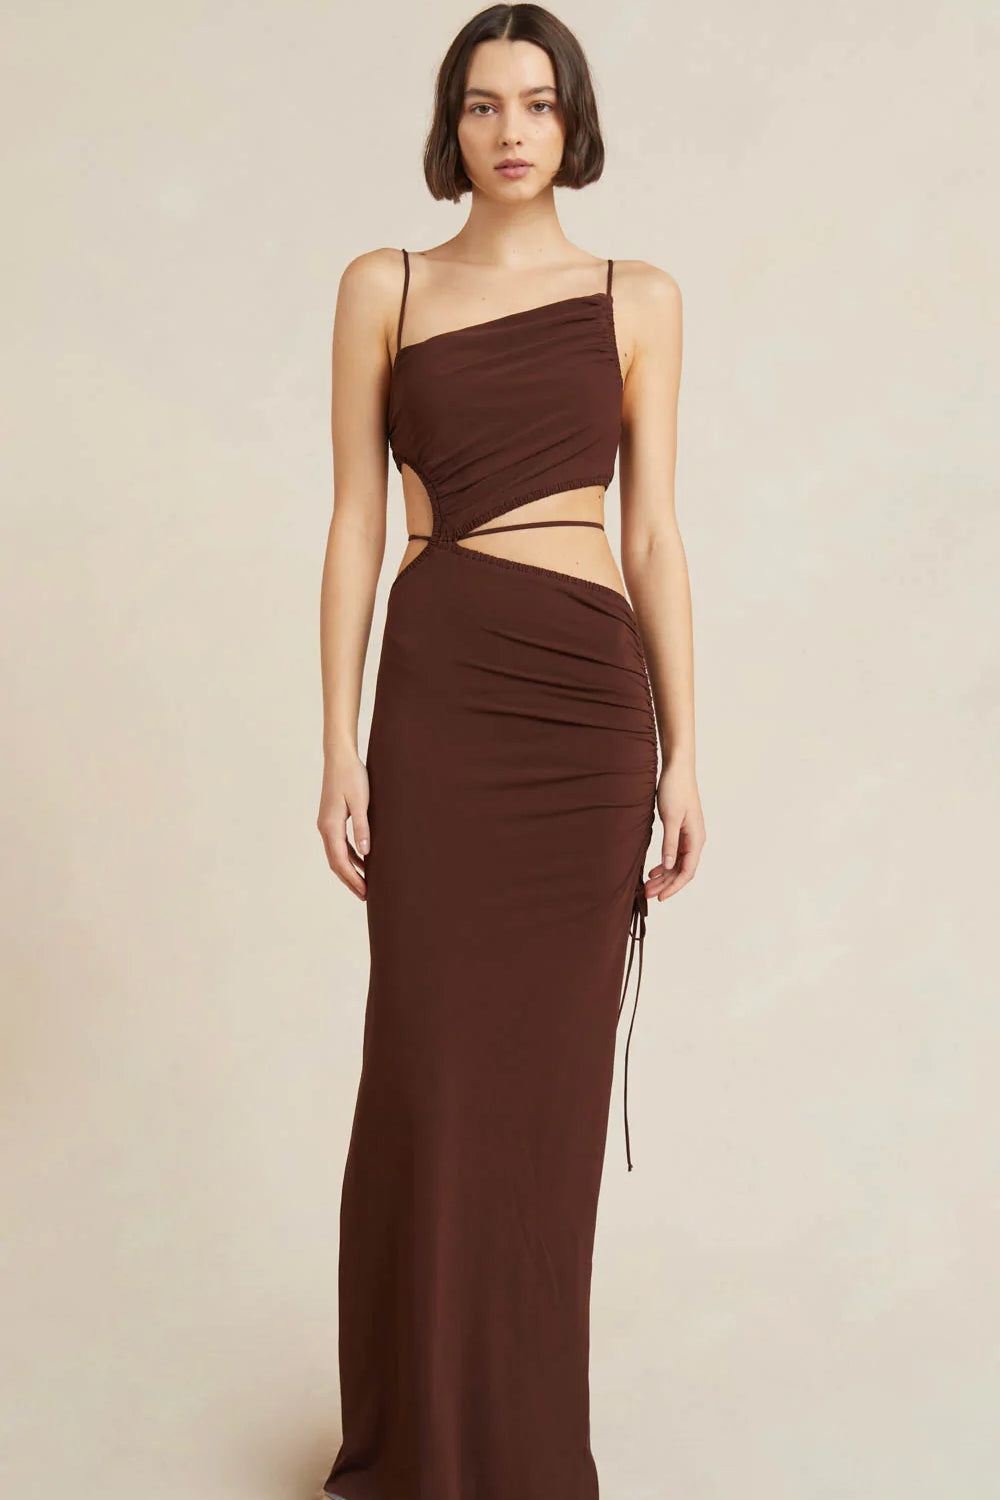 Hire Dresses for Any Occasion | Dress for a Night | Dress for a Night